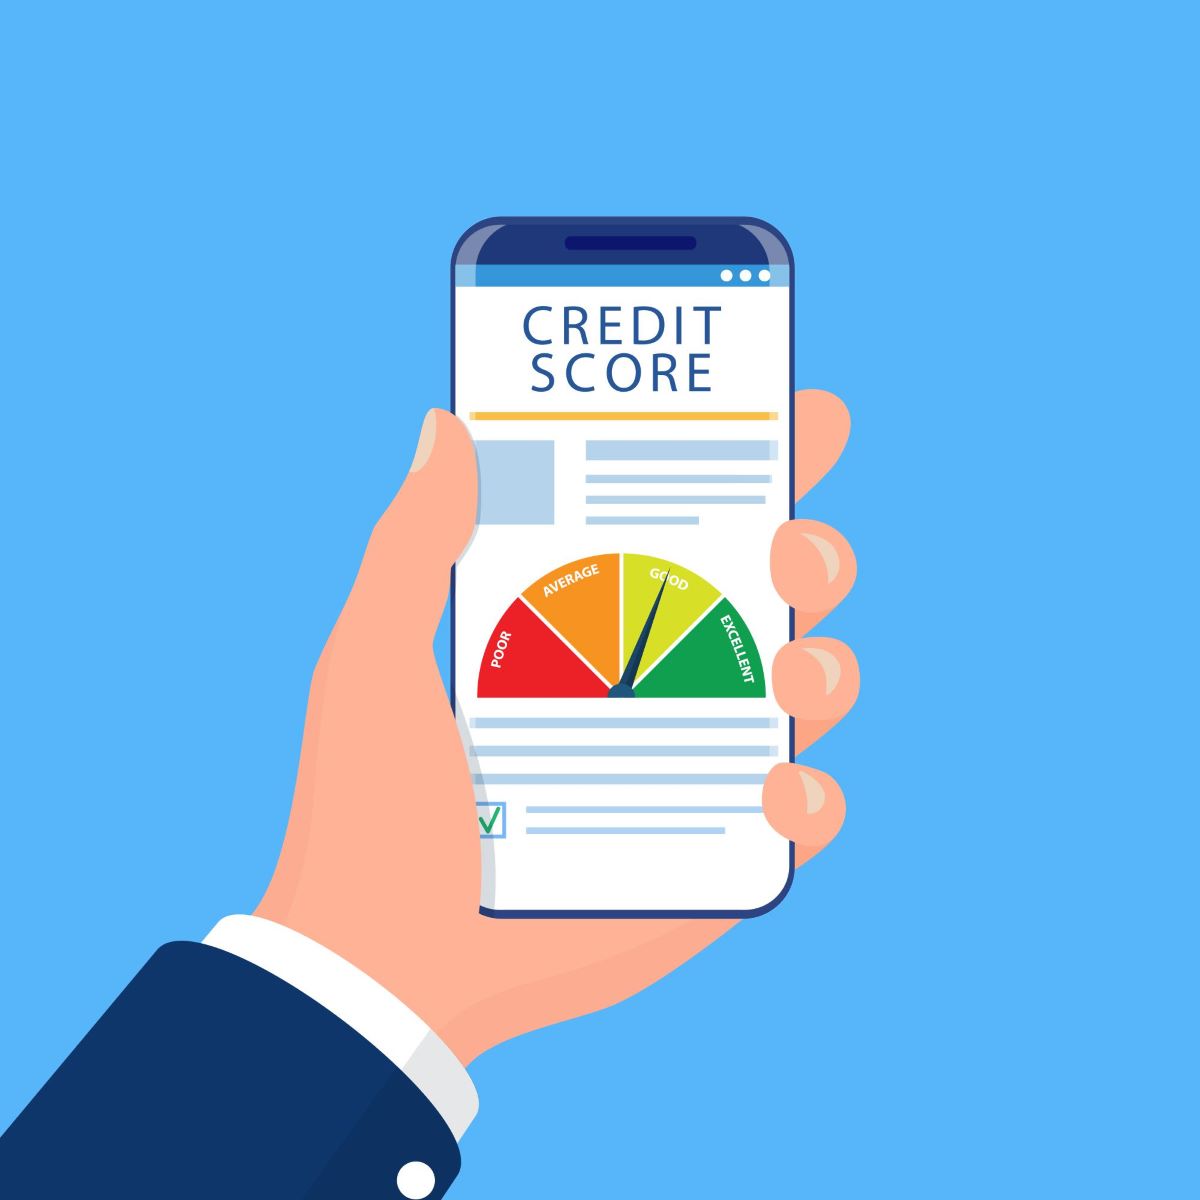 What Is The Relationship Between Credit And Debt?